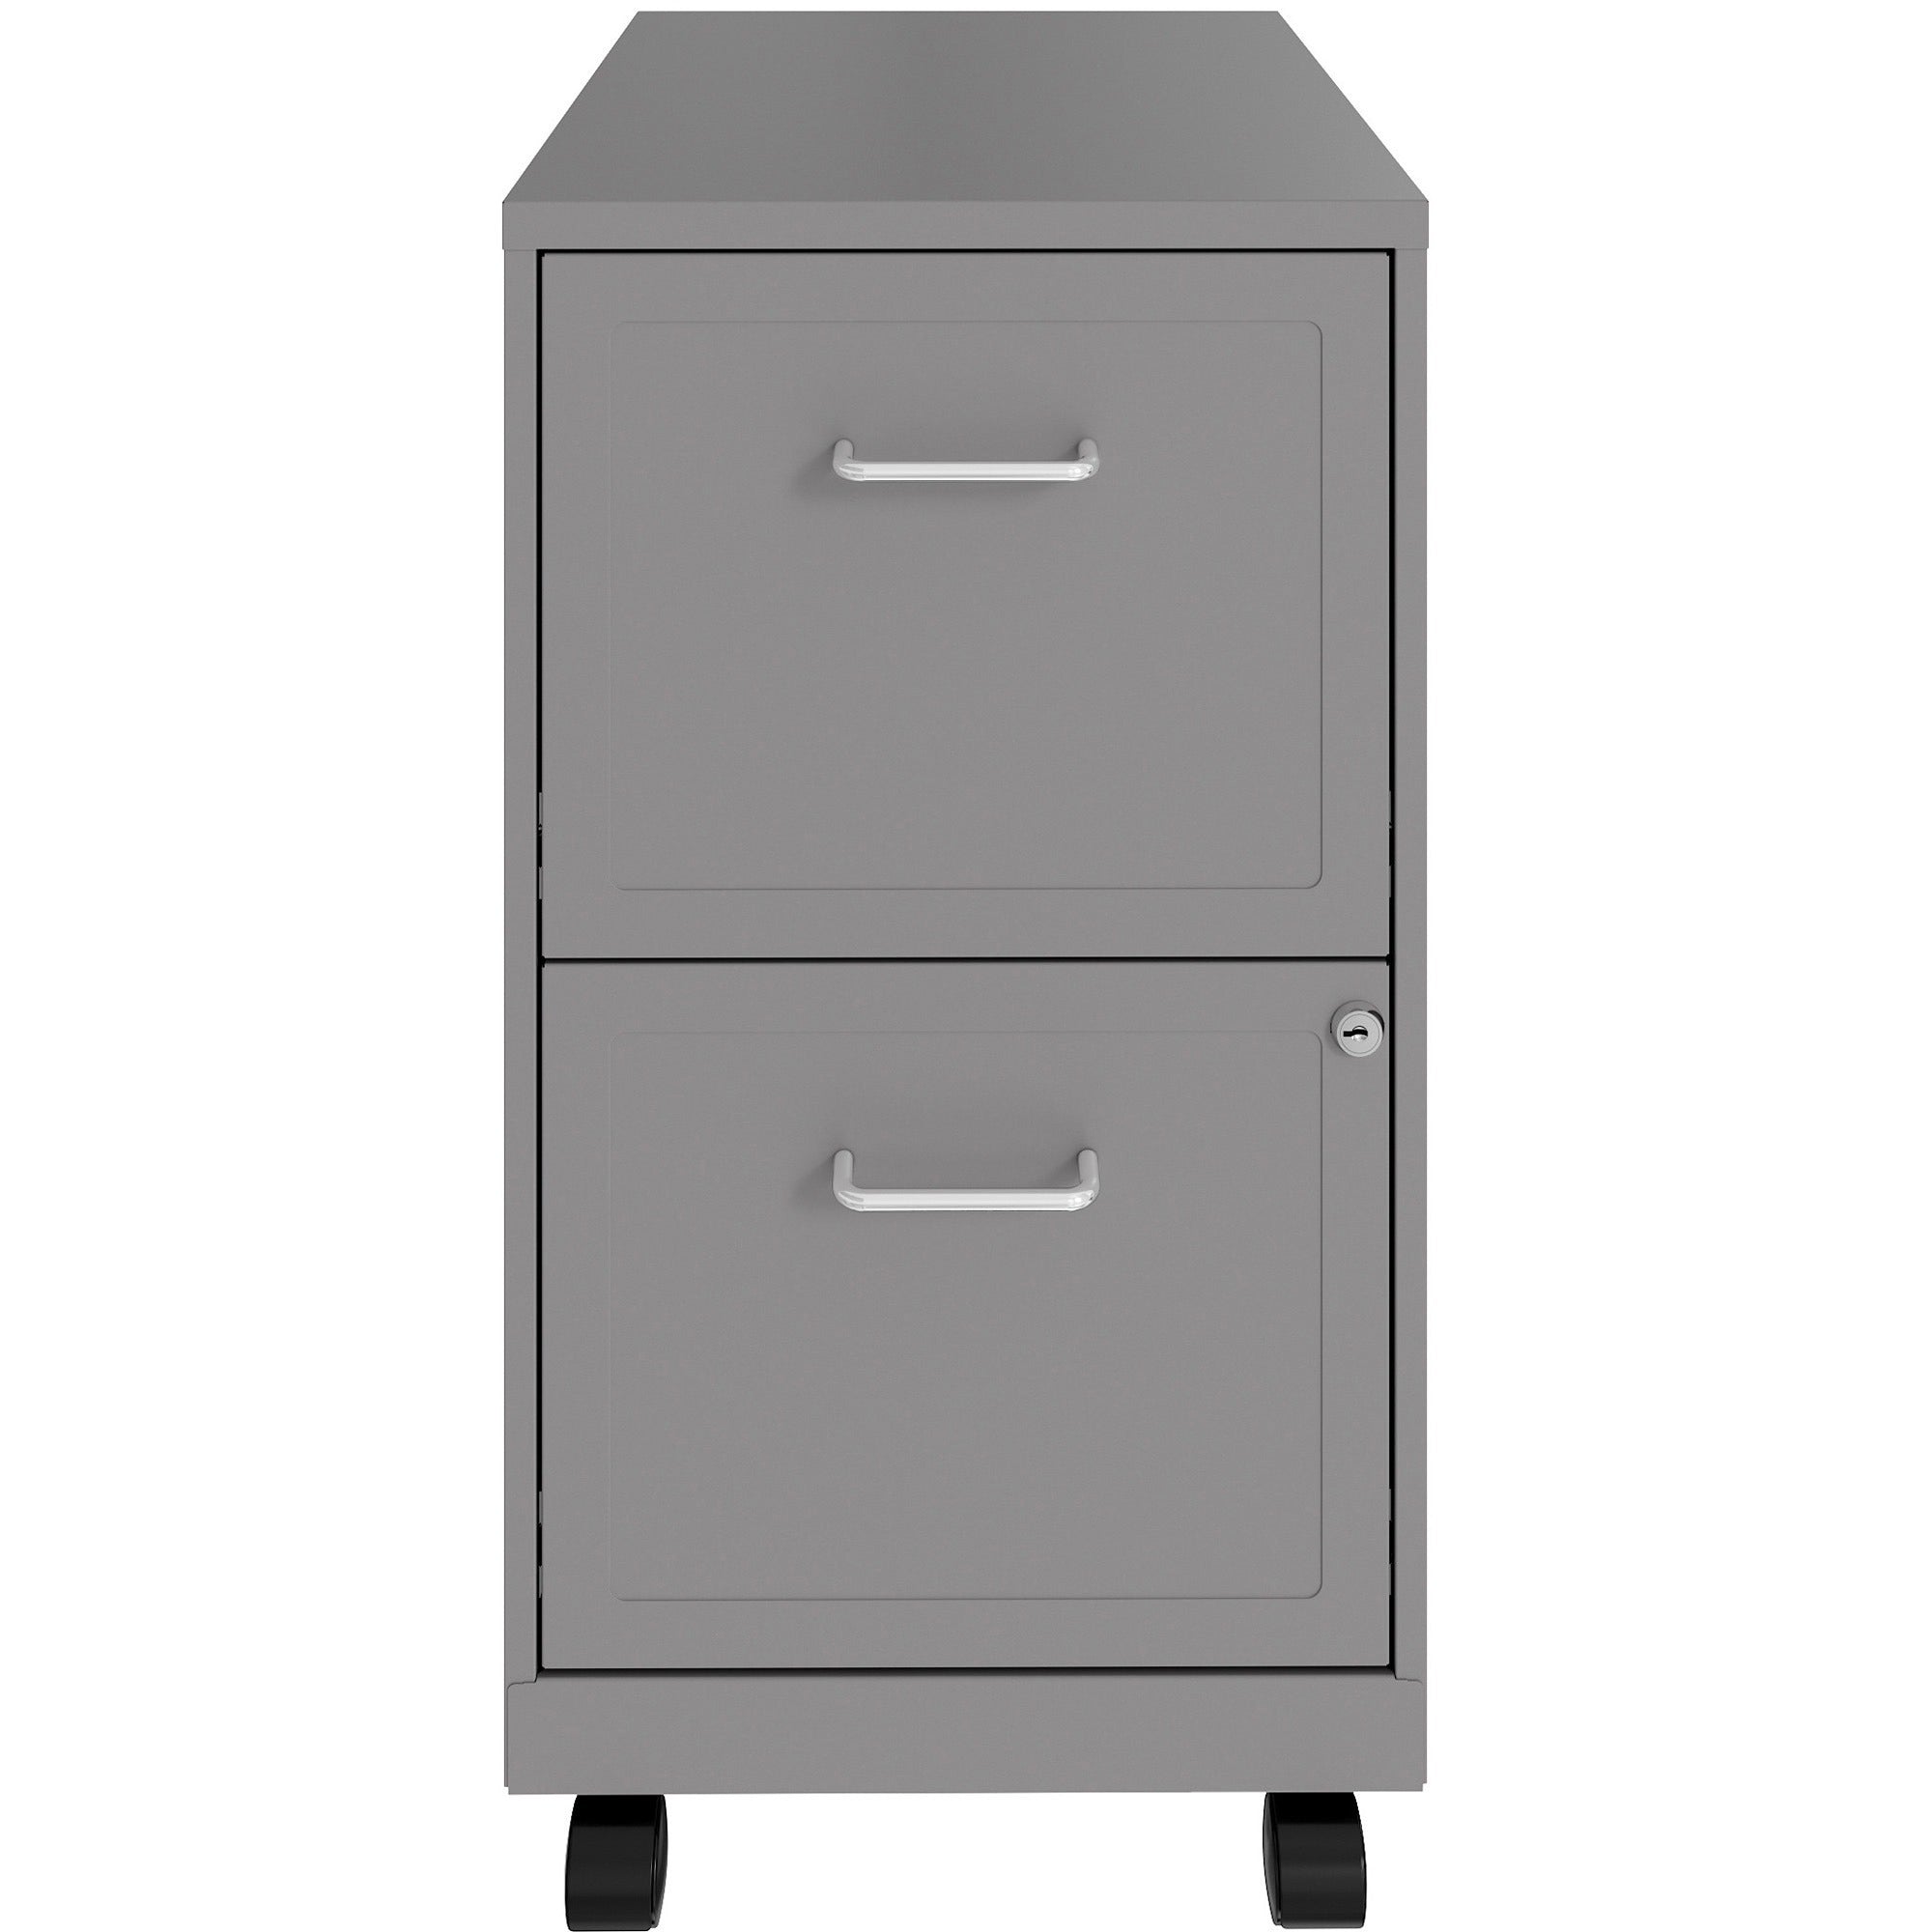 nusparc-mobile-file-cabinet-142-x-18-x-265-for-file-letter-mobility-locking-drawer-glide-suspension-3-4-drawer-extension-cam-lock-nonporous-surface-silver-painted-steel-steel-recycled_nprvf218amsr - 2